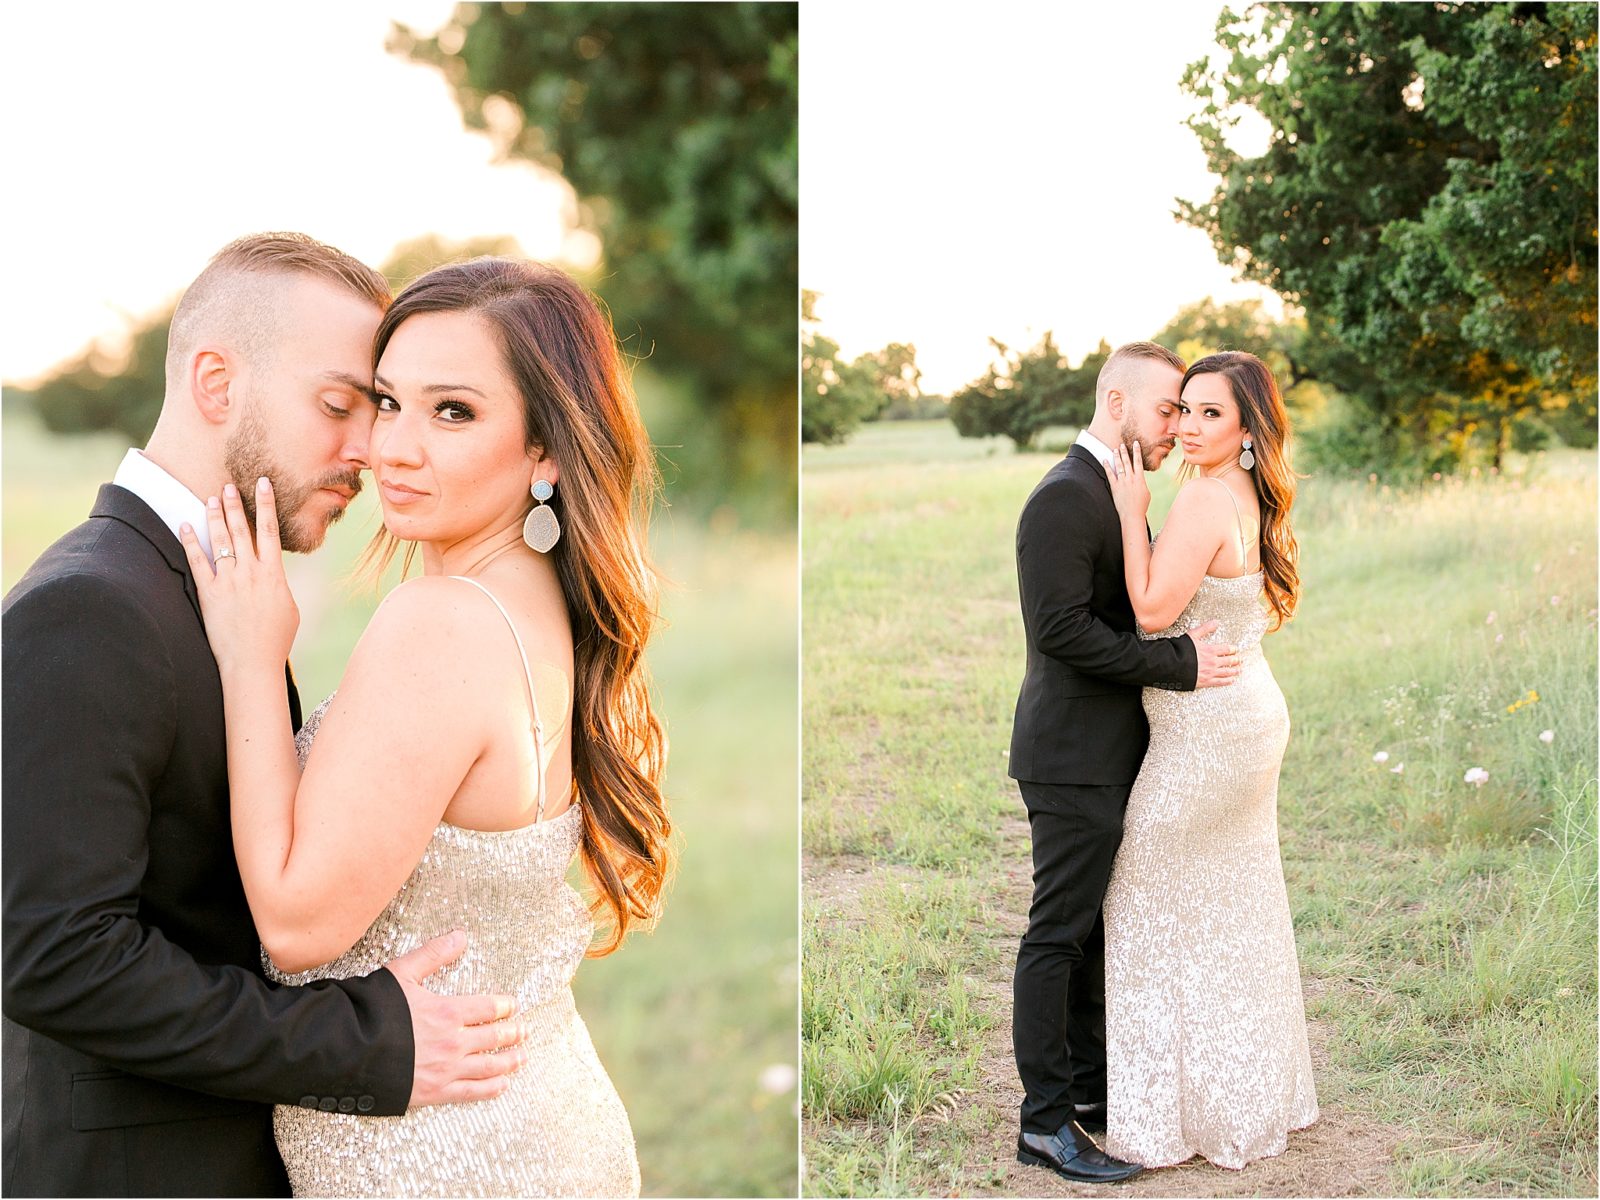 Romantic Outdoor DFW Engagement Session in McKinney Texas by Jillian Hogan Photography